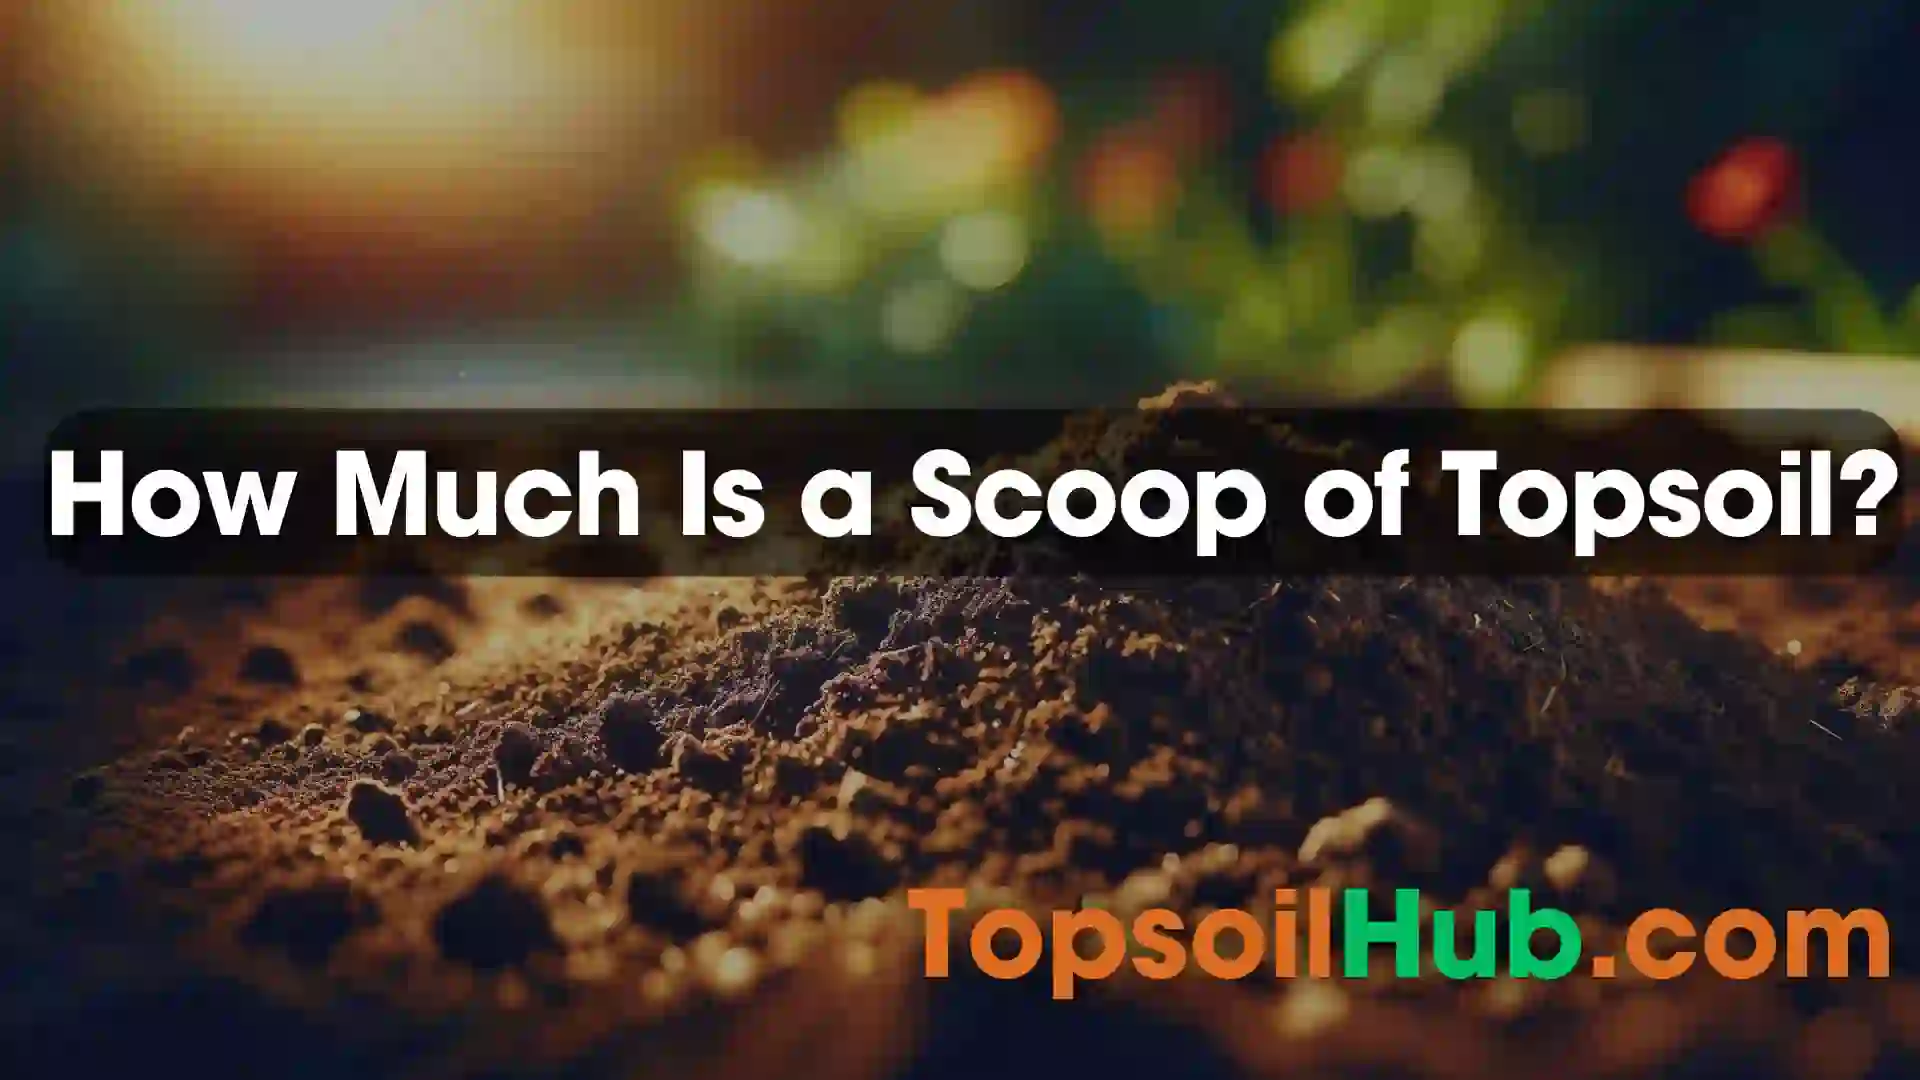 How Much Is a Scoop of Topsoil?